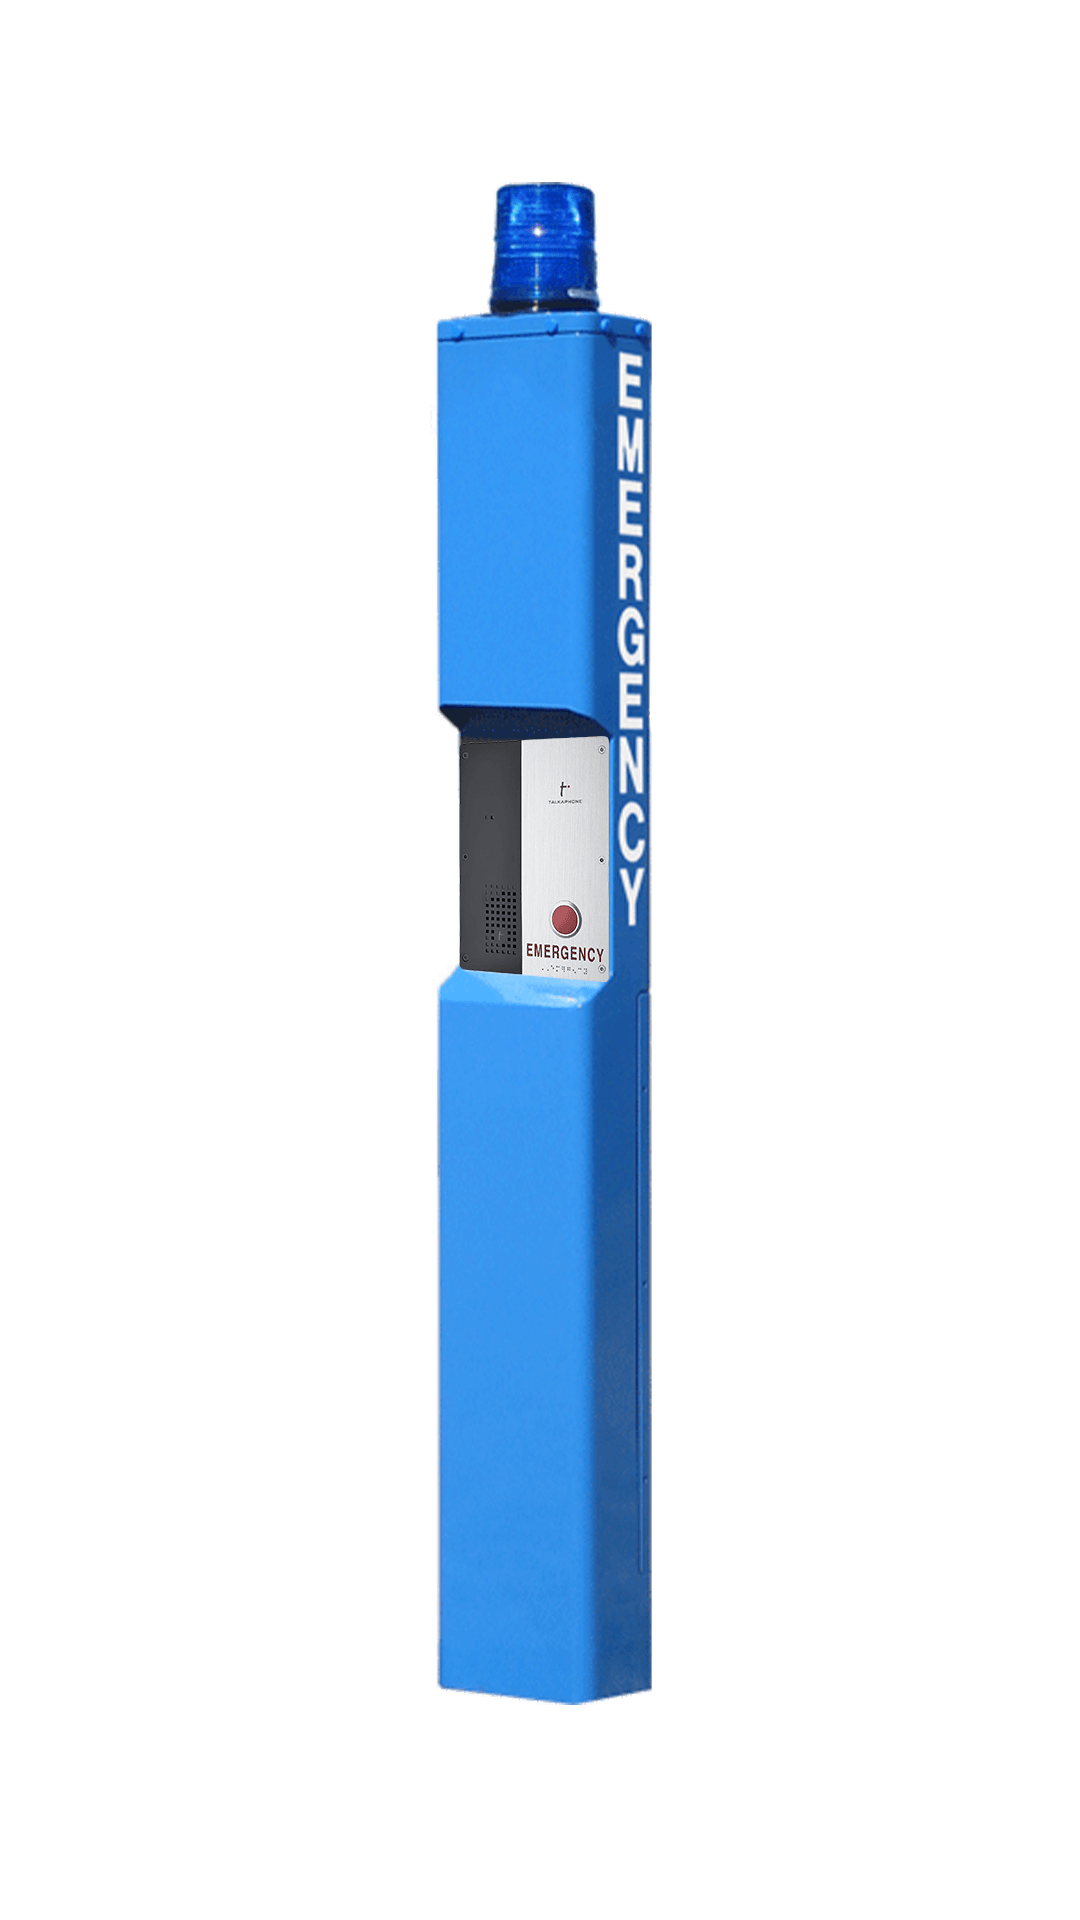 ECO TOWER® Blue Light Call Station Tower (72-inch)